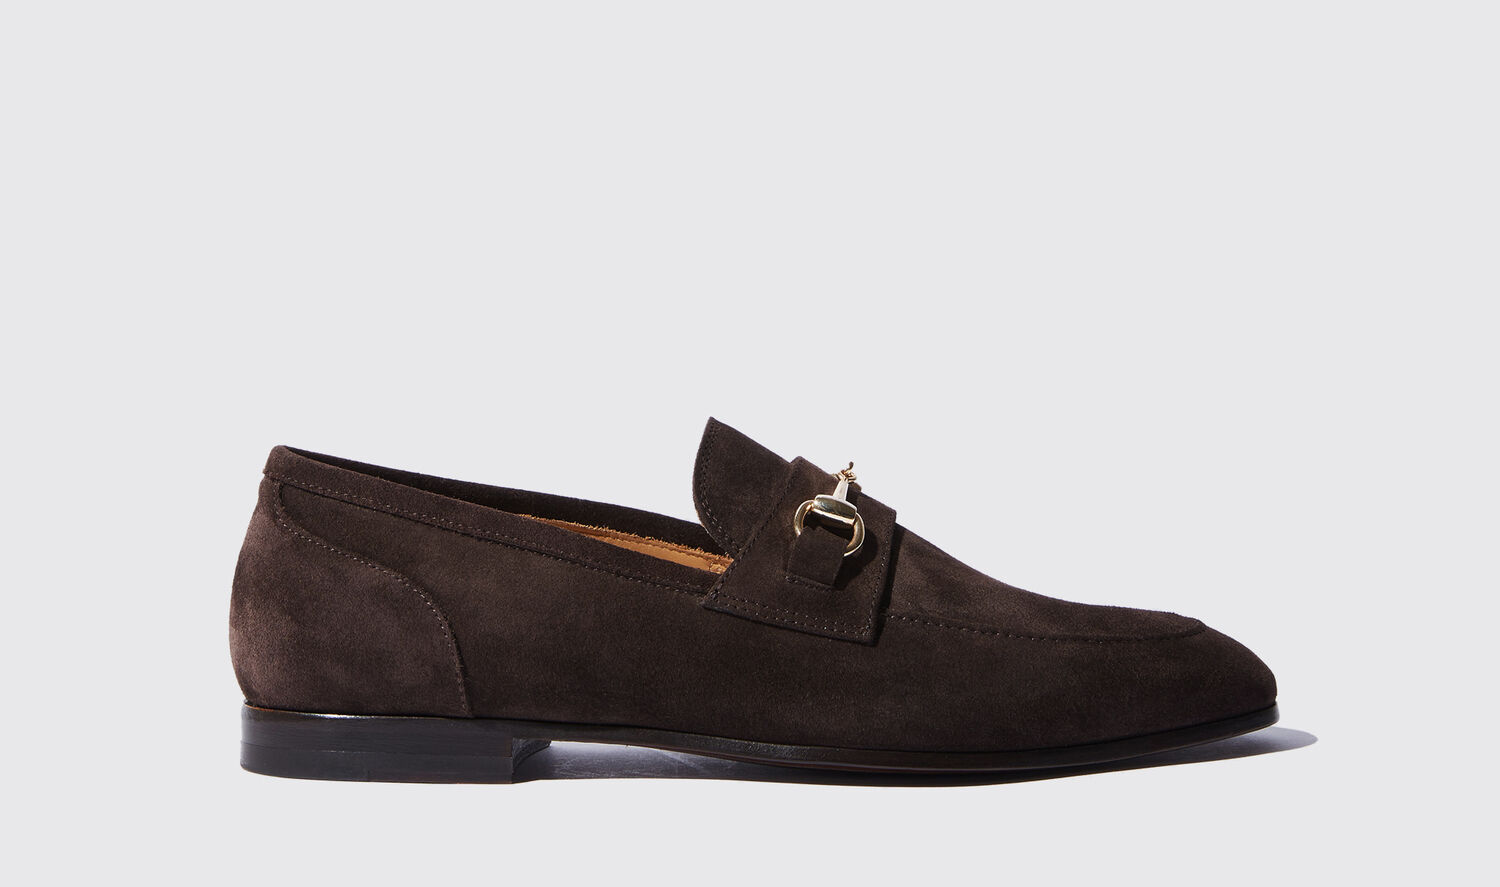 Scarosso Loafers Alessandro Moro Scamosciato Suede Leather In Brown - Suede